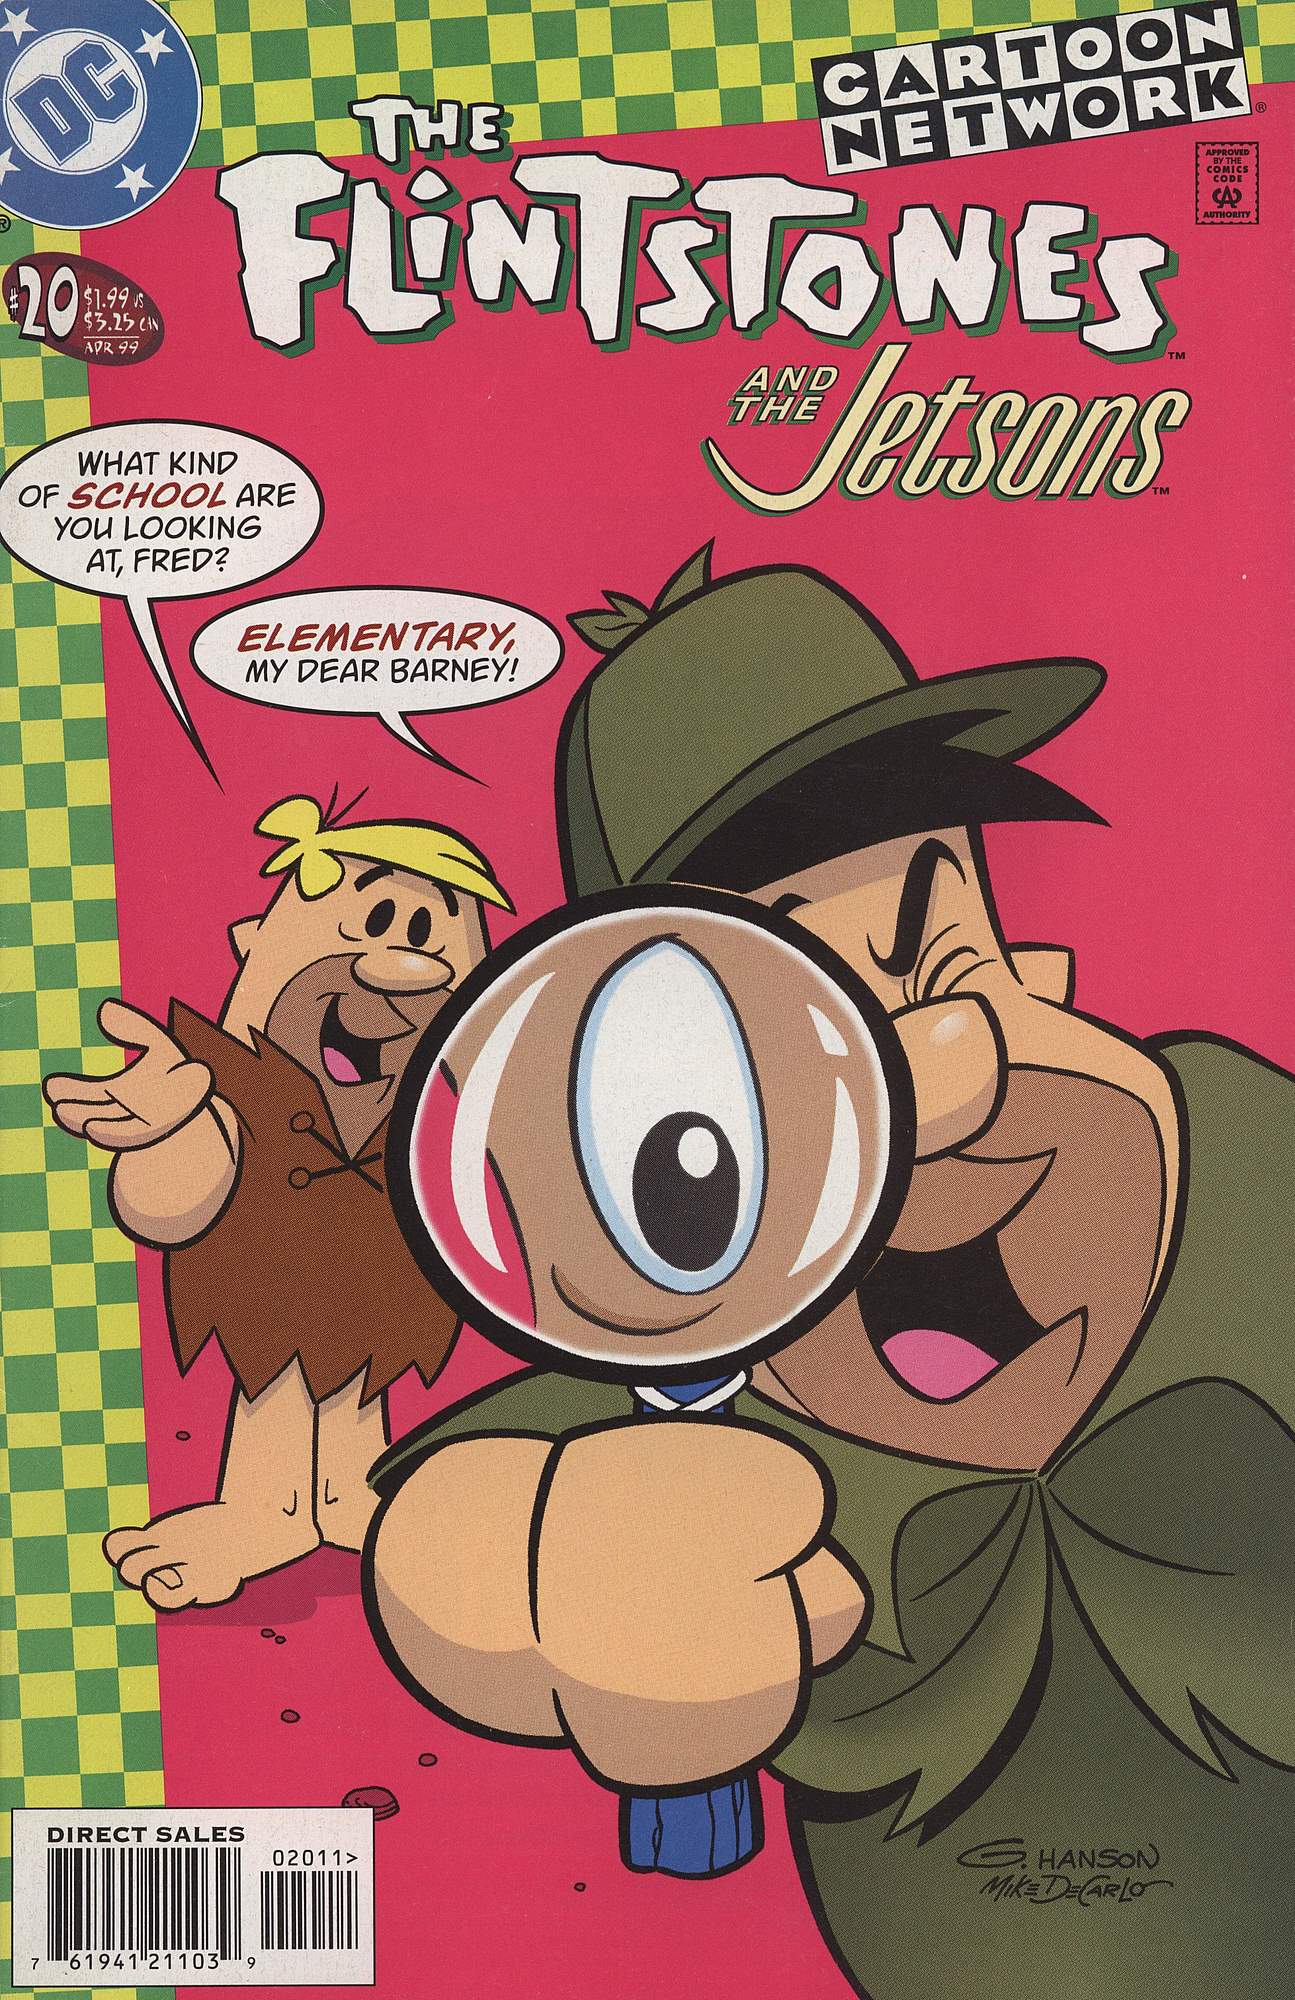 The Flintstones And The Jetsons 20 | Read The Flintstones And The Jetsons  20 comic online in high quality. Read Full Comic online for free - Read  comics online in high quality .| READ COMIC ONLINE